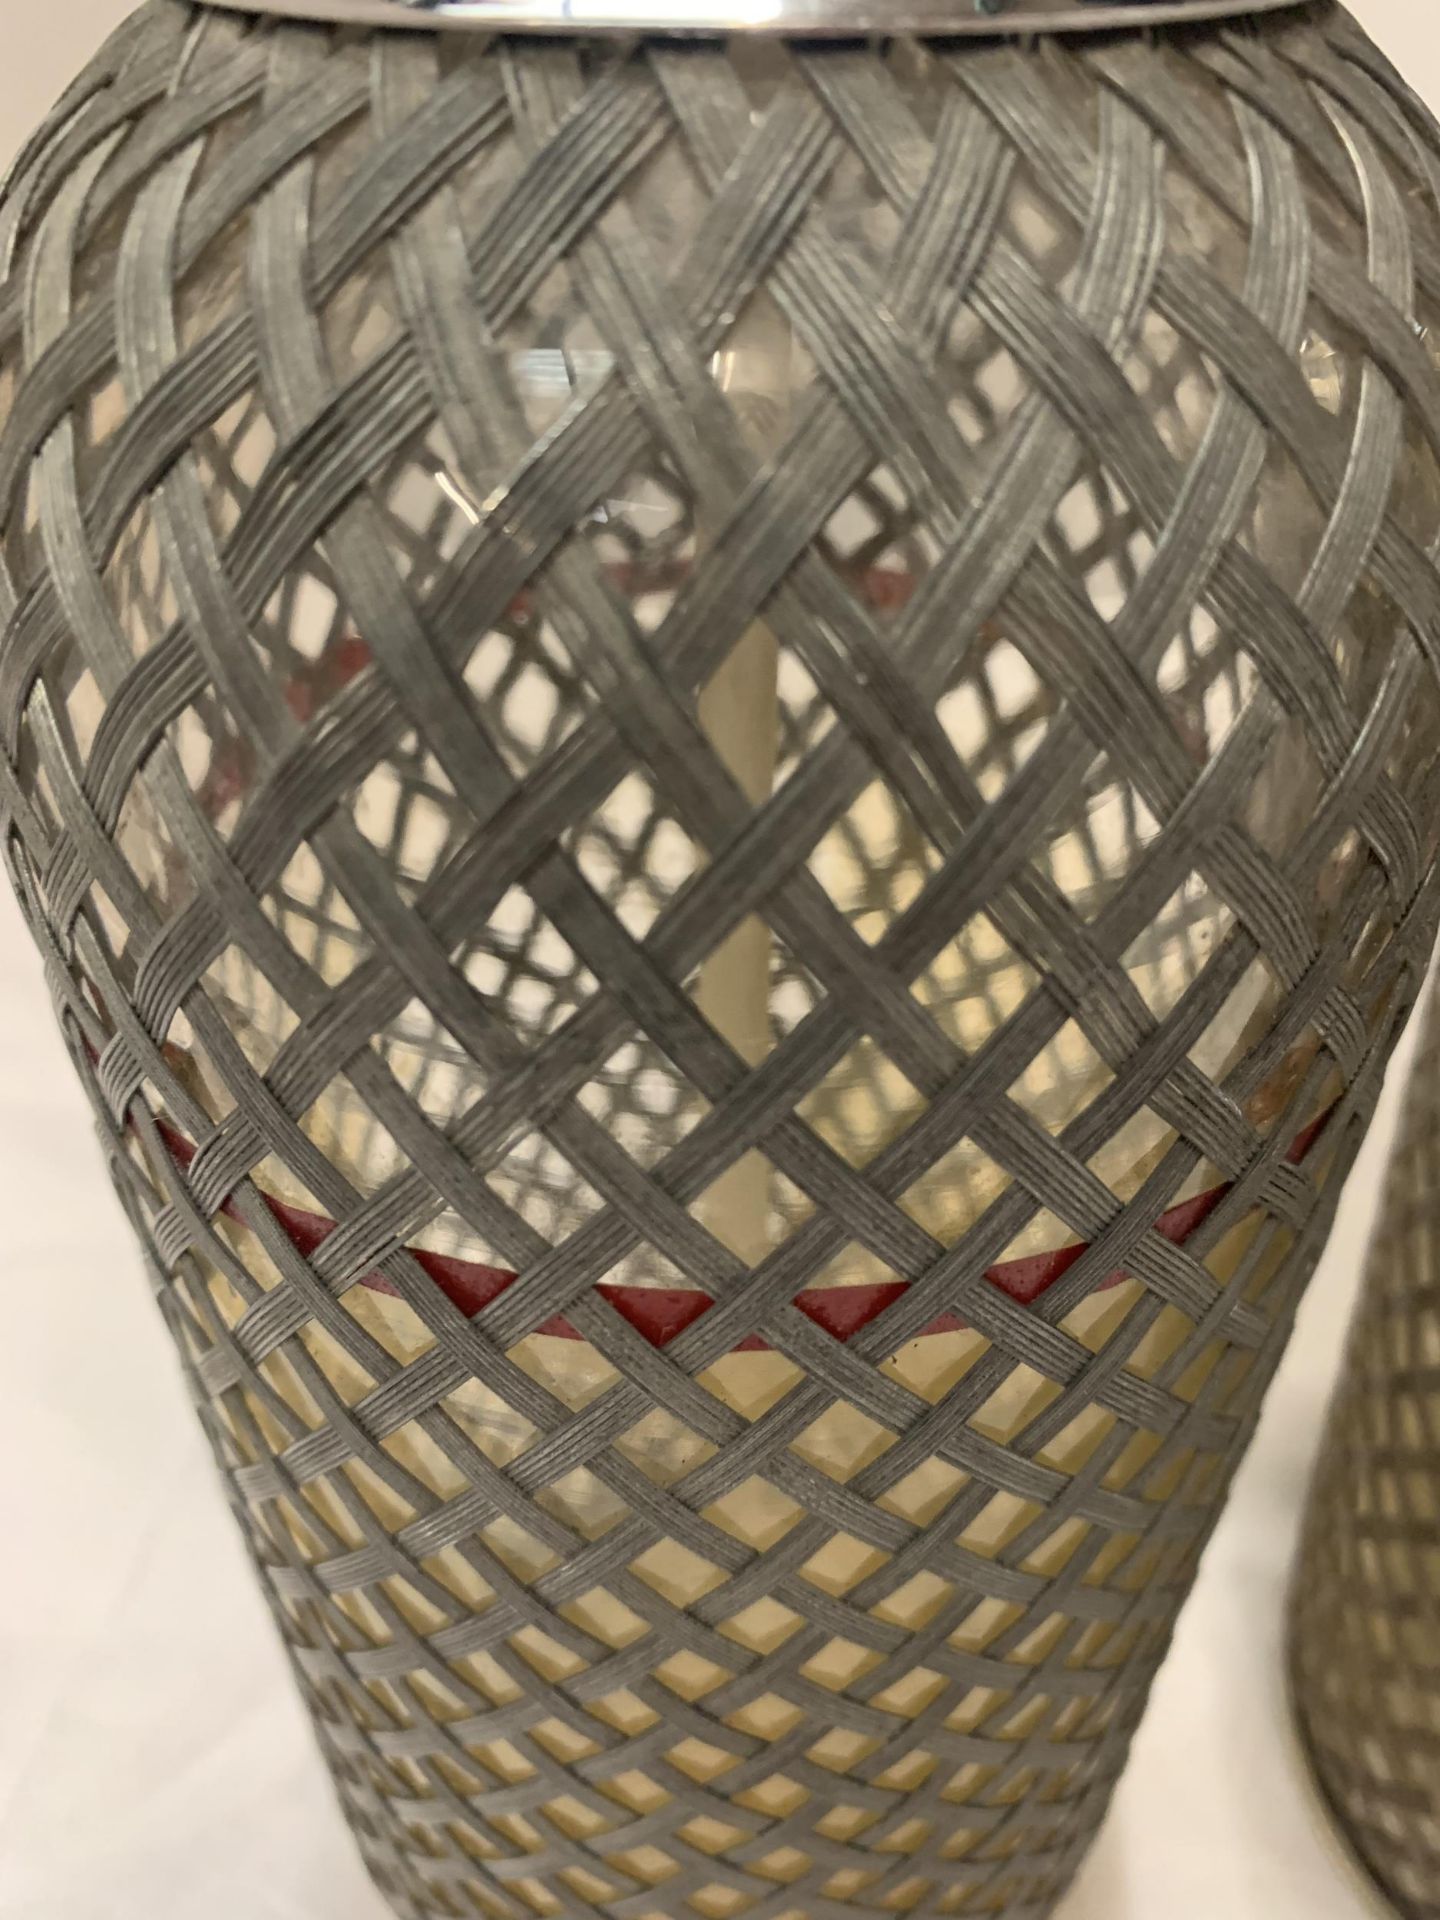 TWO SODA SYPHONS WITH WIRE STYLE MESH COVERING, MADE IN ENGLAND - Image 3 of 3